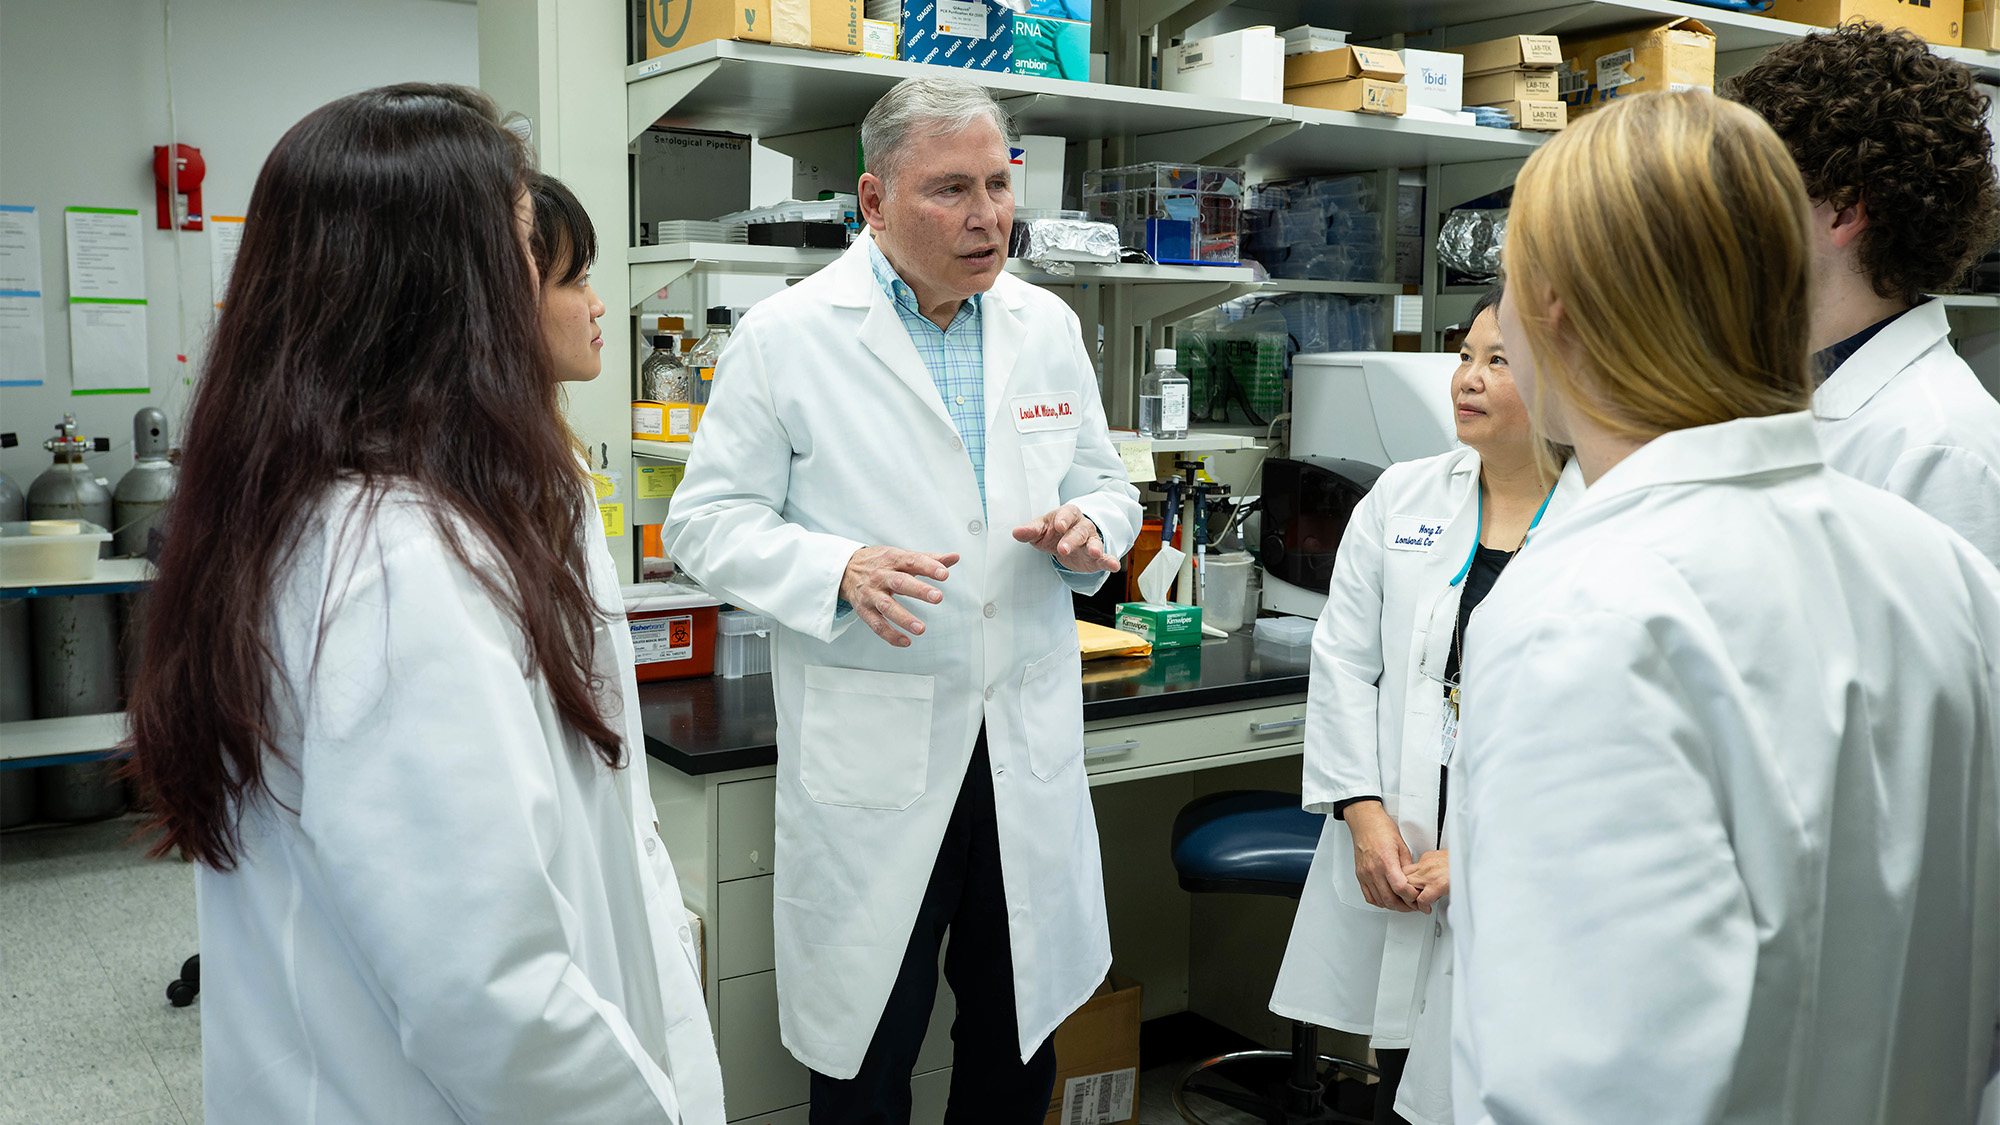 Dr. Weiner speaks with members of his lab